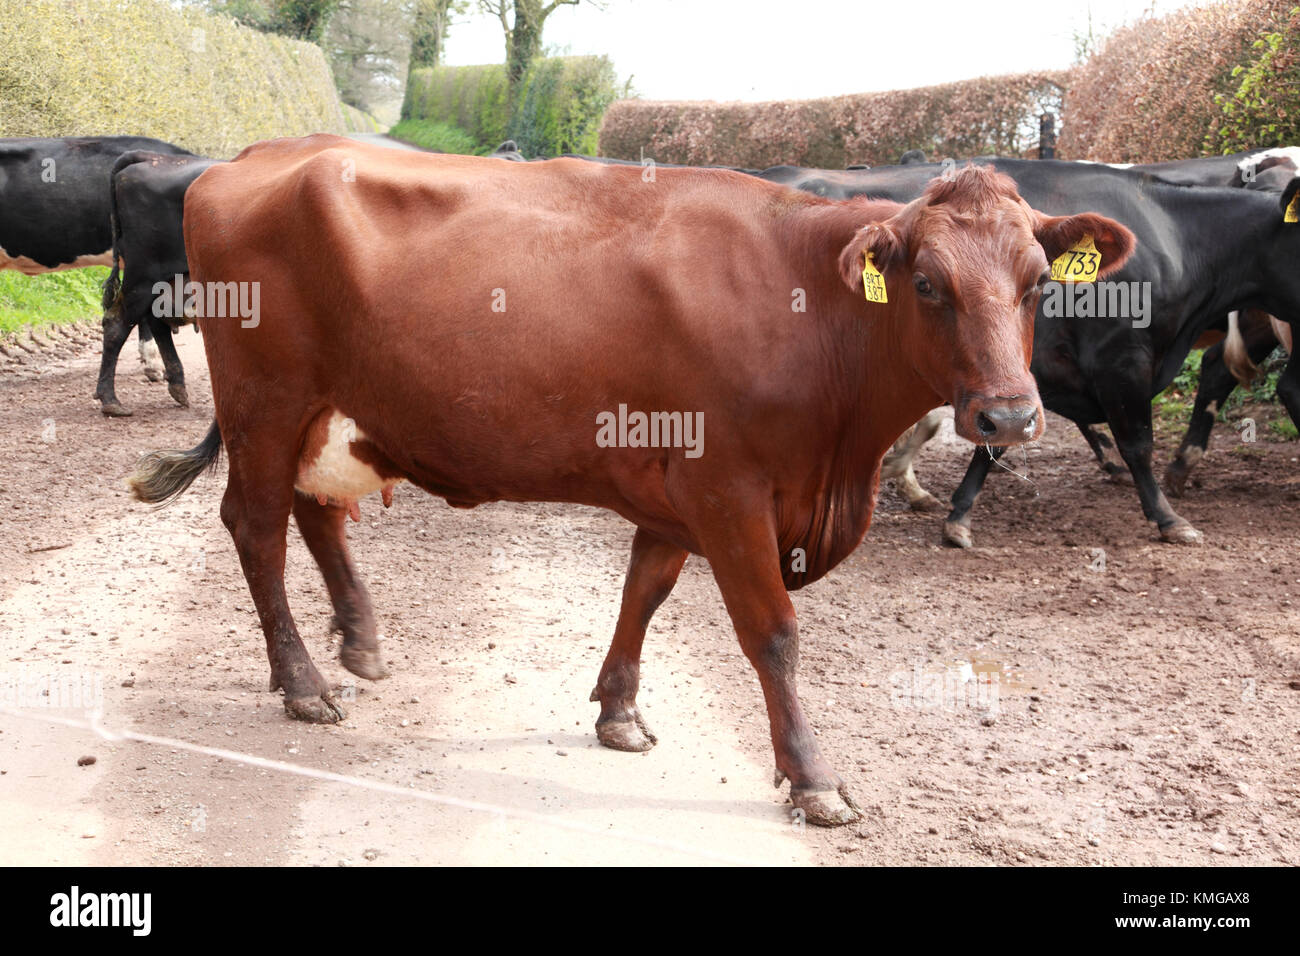 A brown dairy cow in a herd of cows crossing a country lane in order to be milked Stock Photo